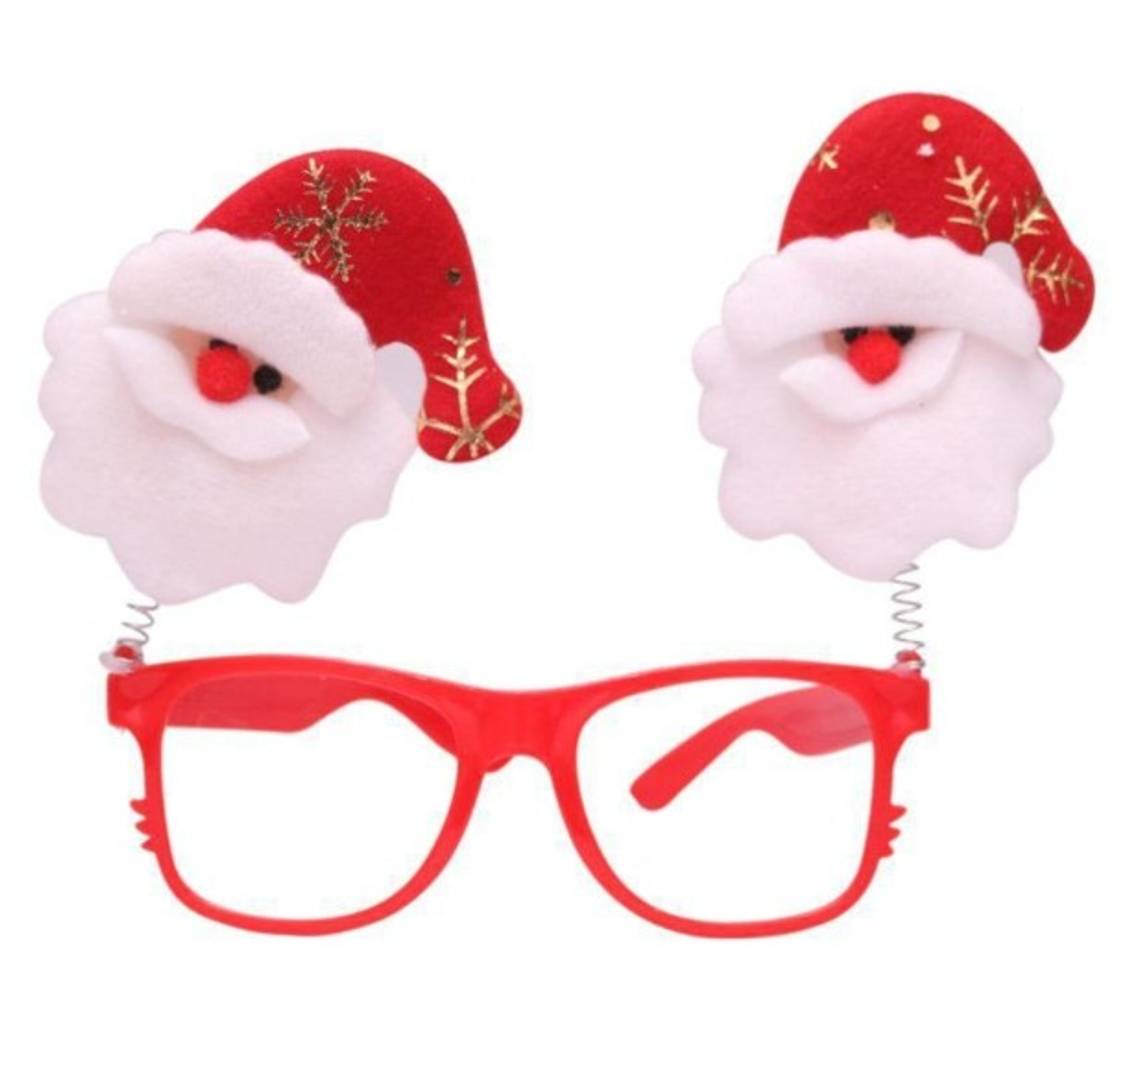 Christmas Decoration Items - Santa Claus Goggle - Pack of 2